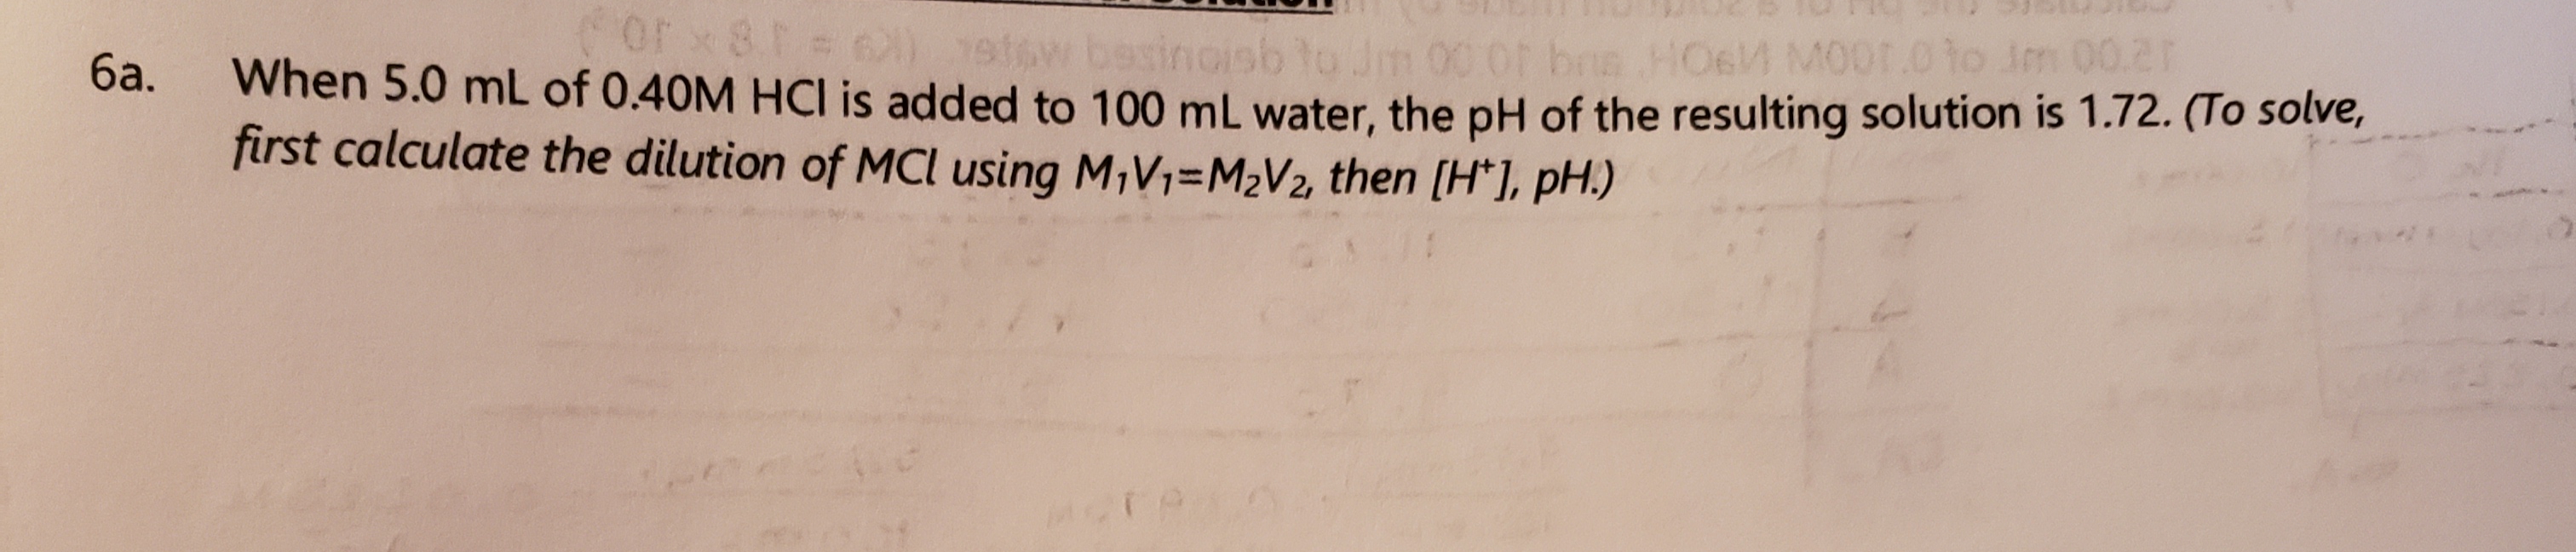 or x81=
10.
1atow besinoisb to Jm 00
HO6M M00T.0 to Jm 00.2r
When 5.0 mL of 0.40M HCI is added to 100 mL water, the pH of the resulting solution is 1.72. (To solve,
first calculate the dilution of MCl using M,V1=M2V2, then (H*], pH.)
ба.
